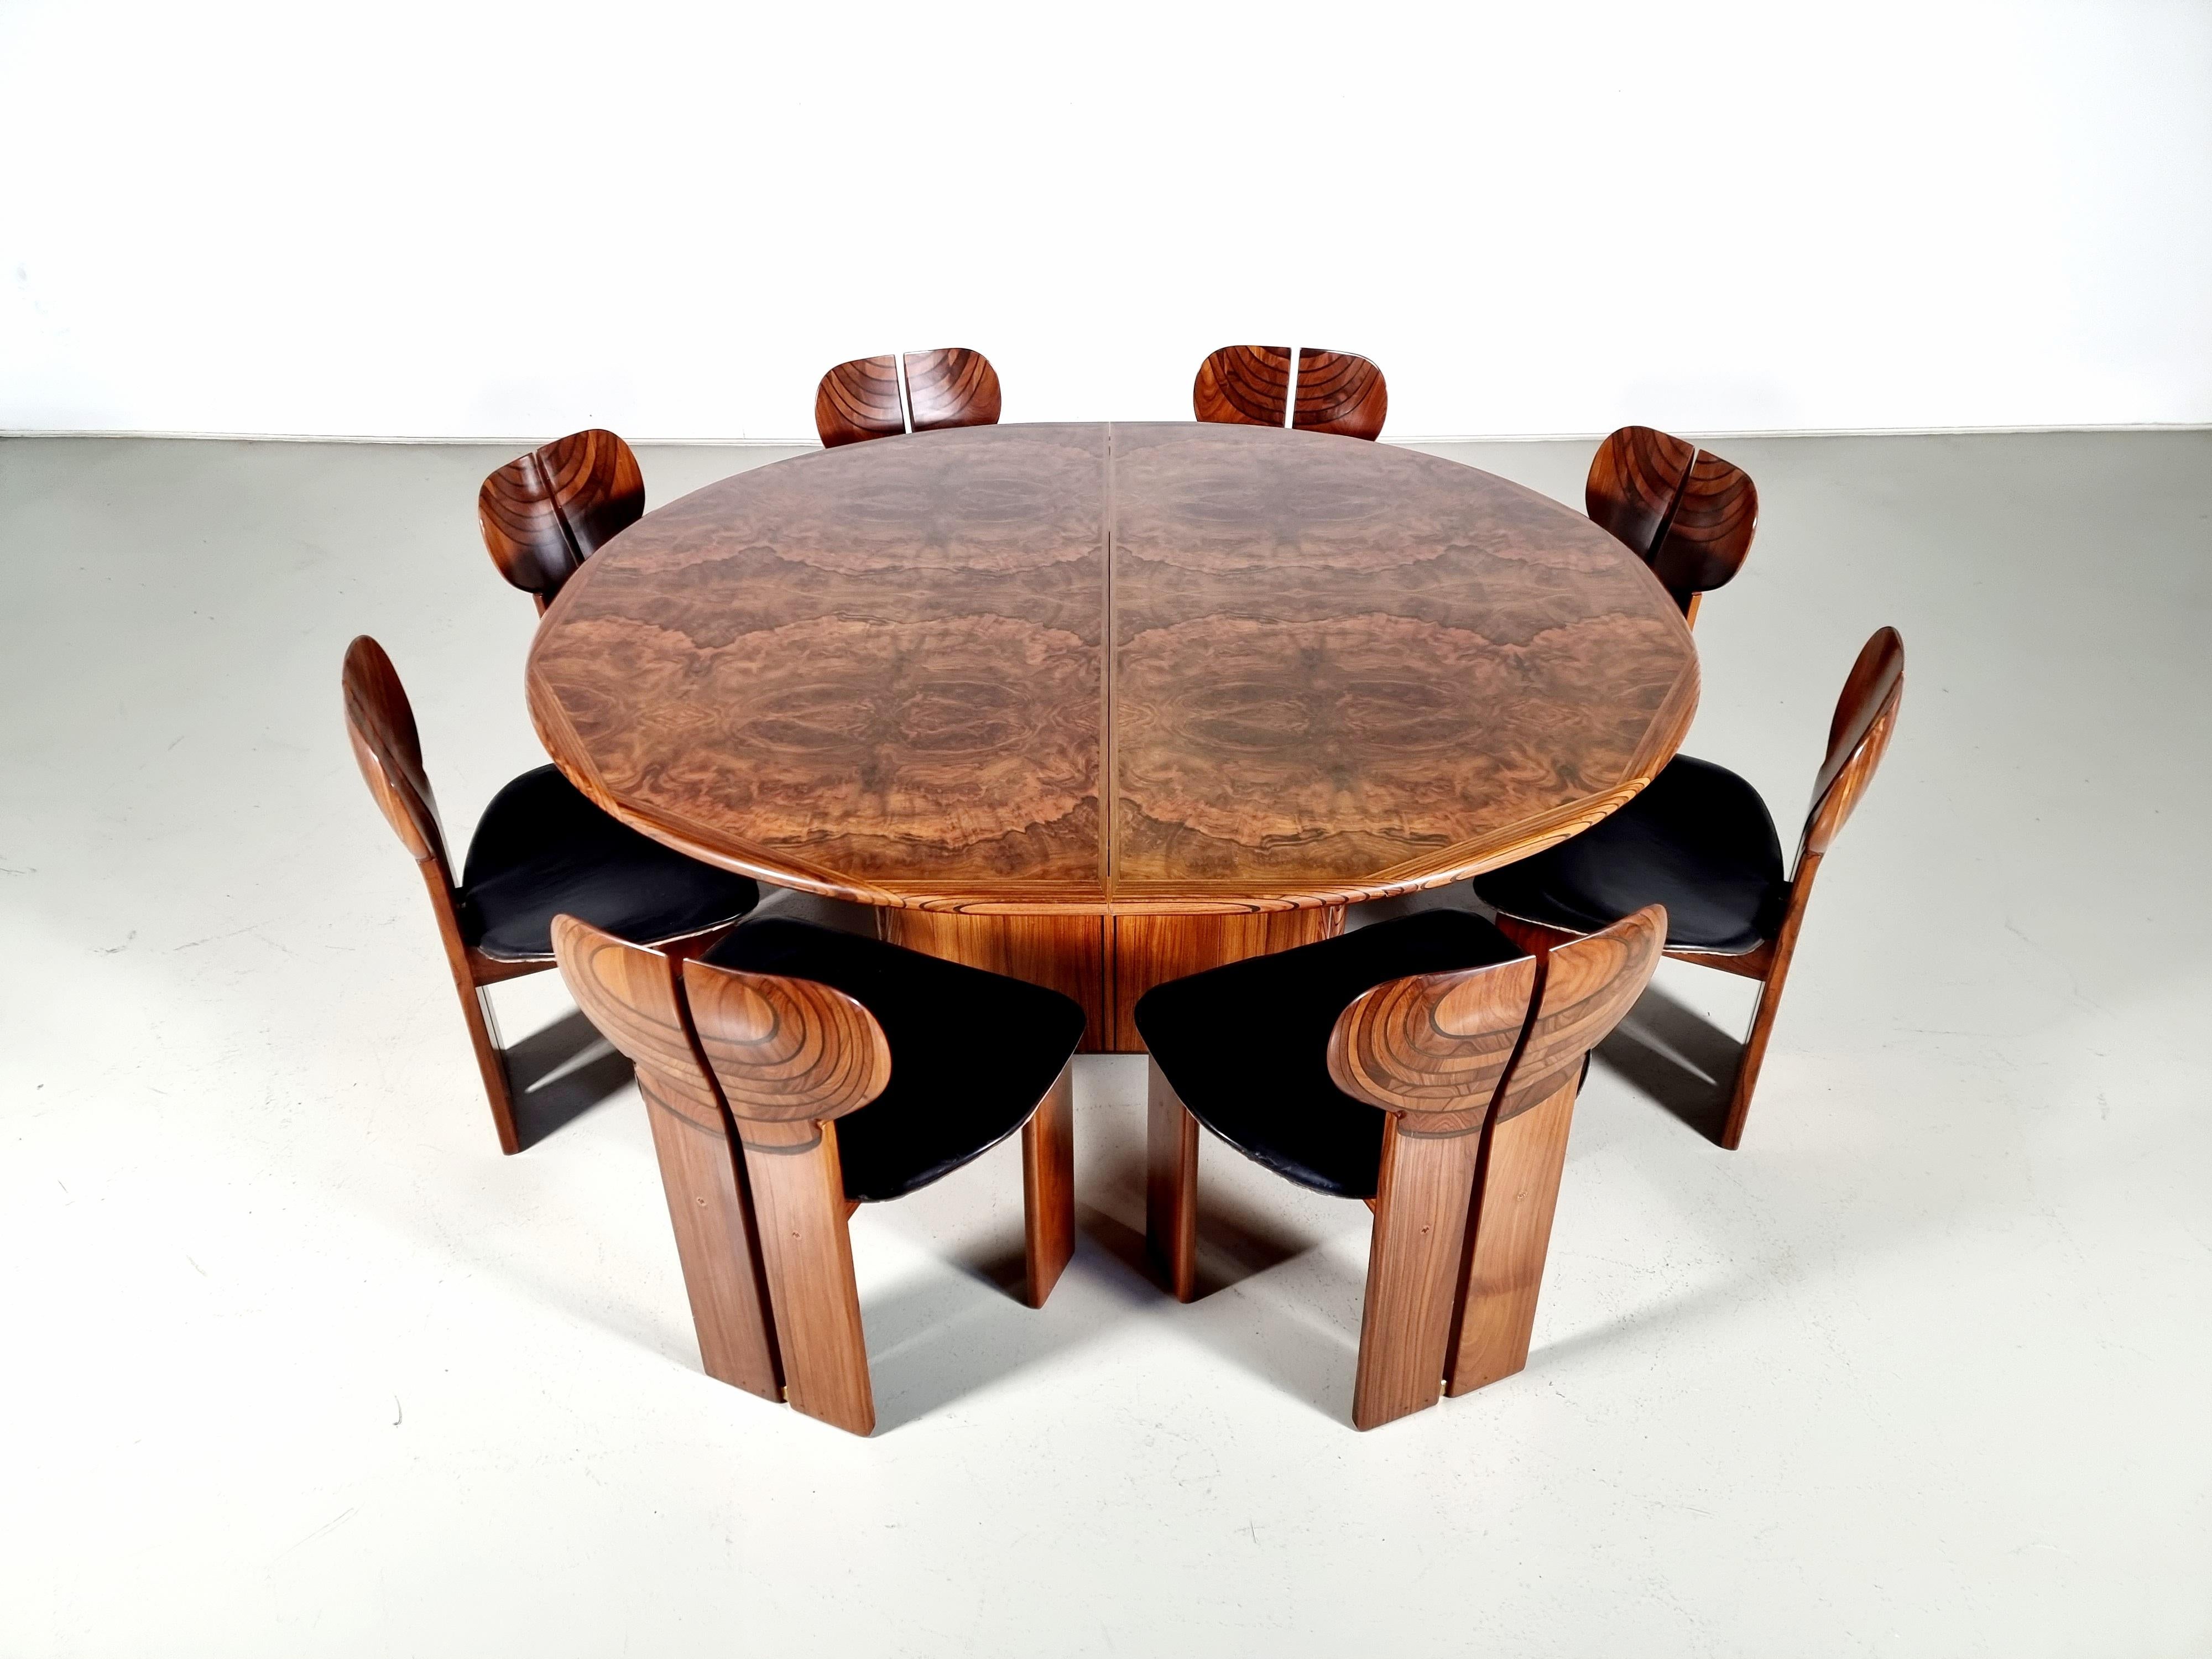 European Artona 'Africa' dining set by Tobia Scarpa in walnut wood and leather, Maxalto For Sale